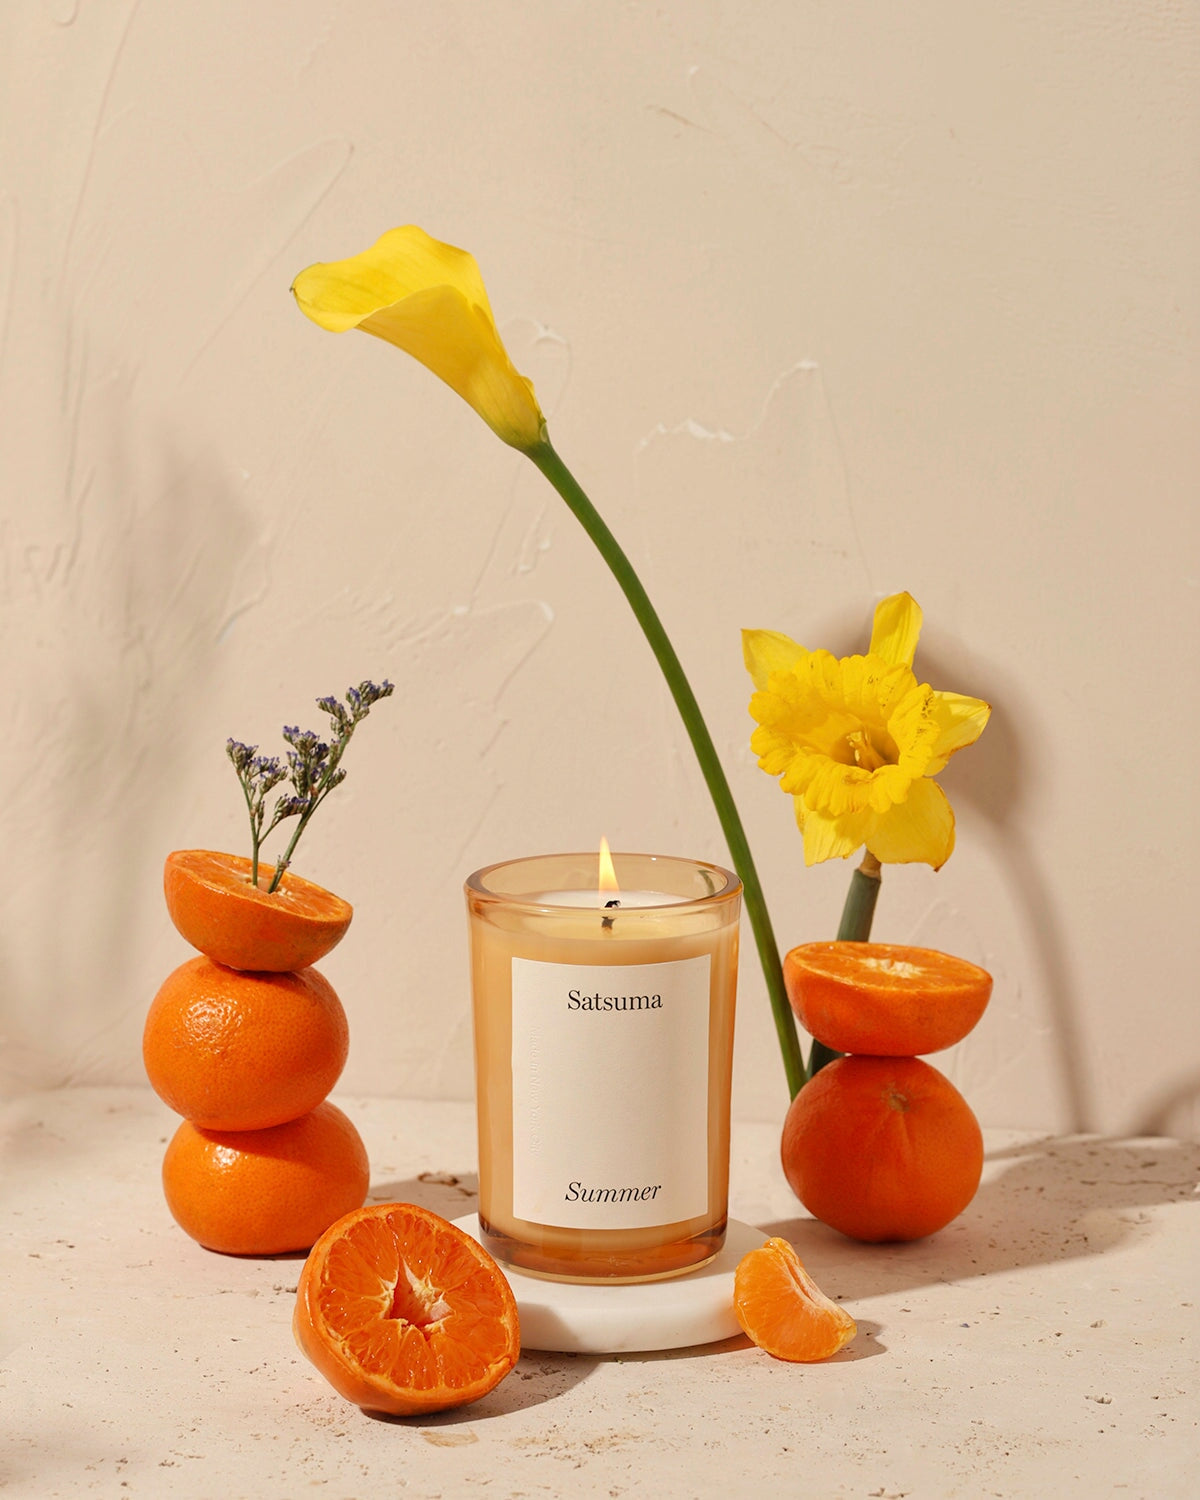 Limited Edition Satsuma Summer Candle Limited Edition Brooklyn Candle Studio 